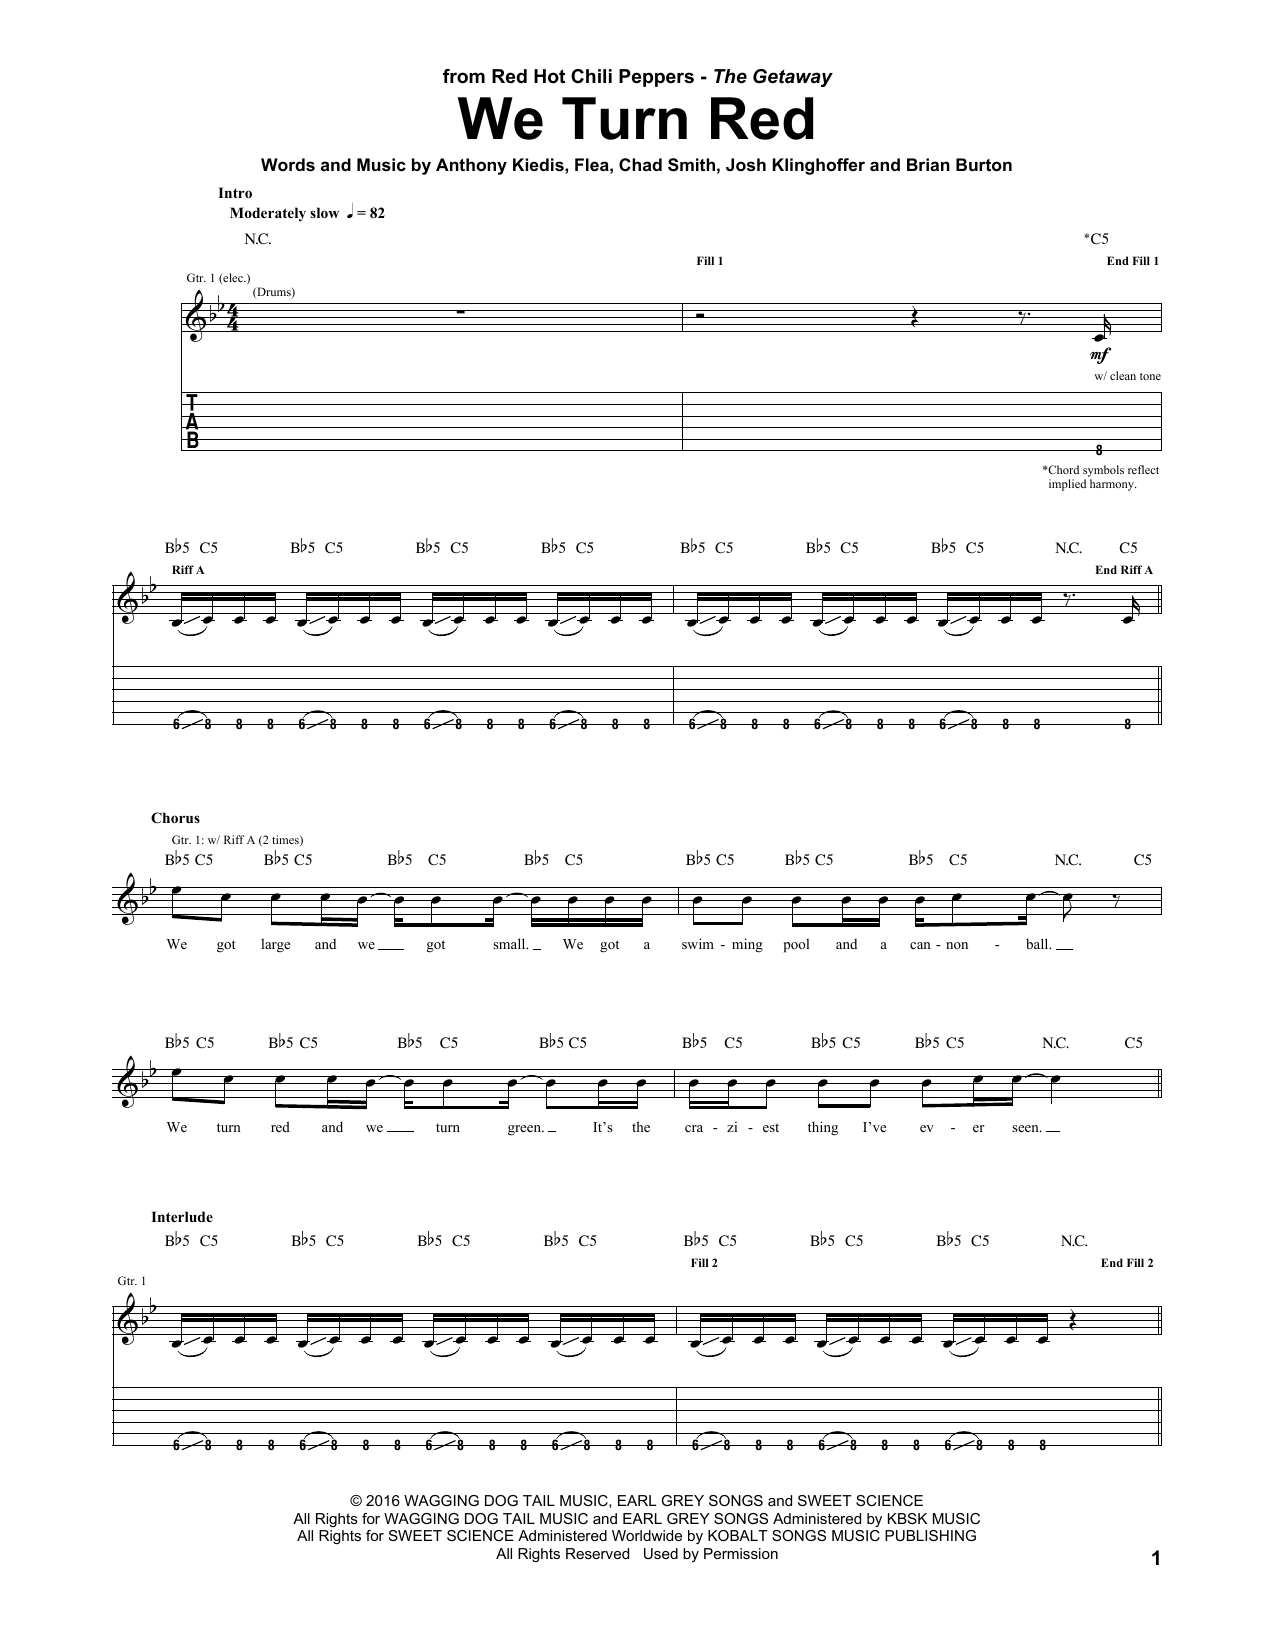 Download Red Hot Chili Peppers We Turn Red Sheet Music